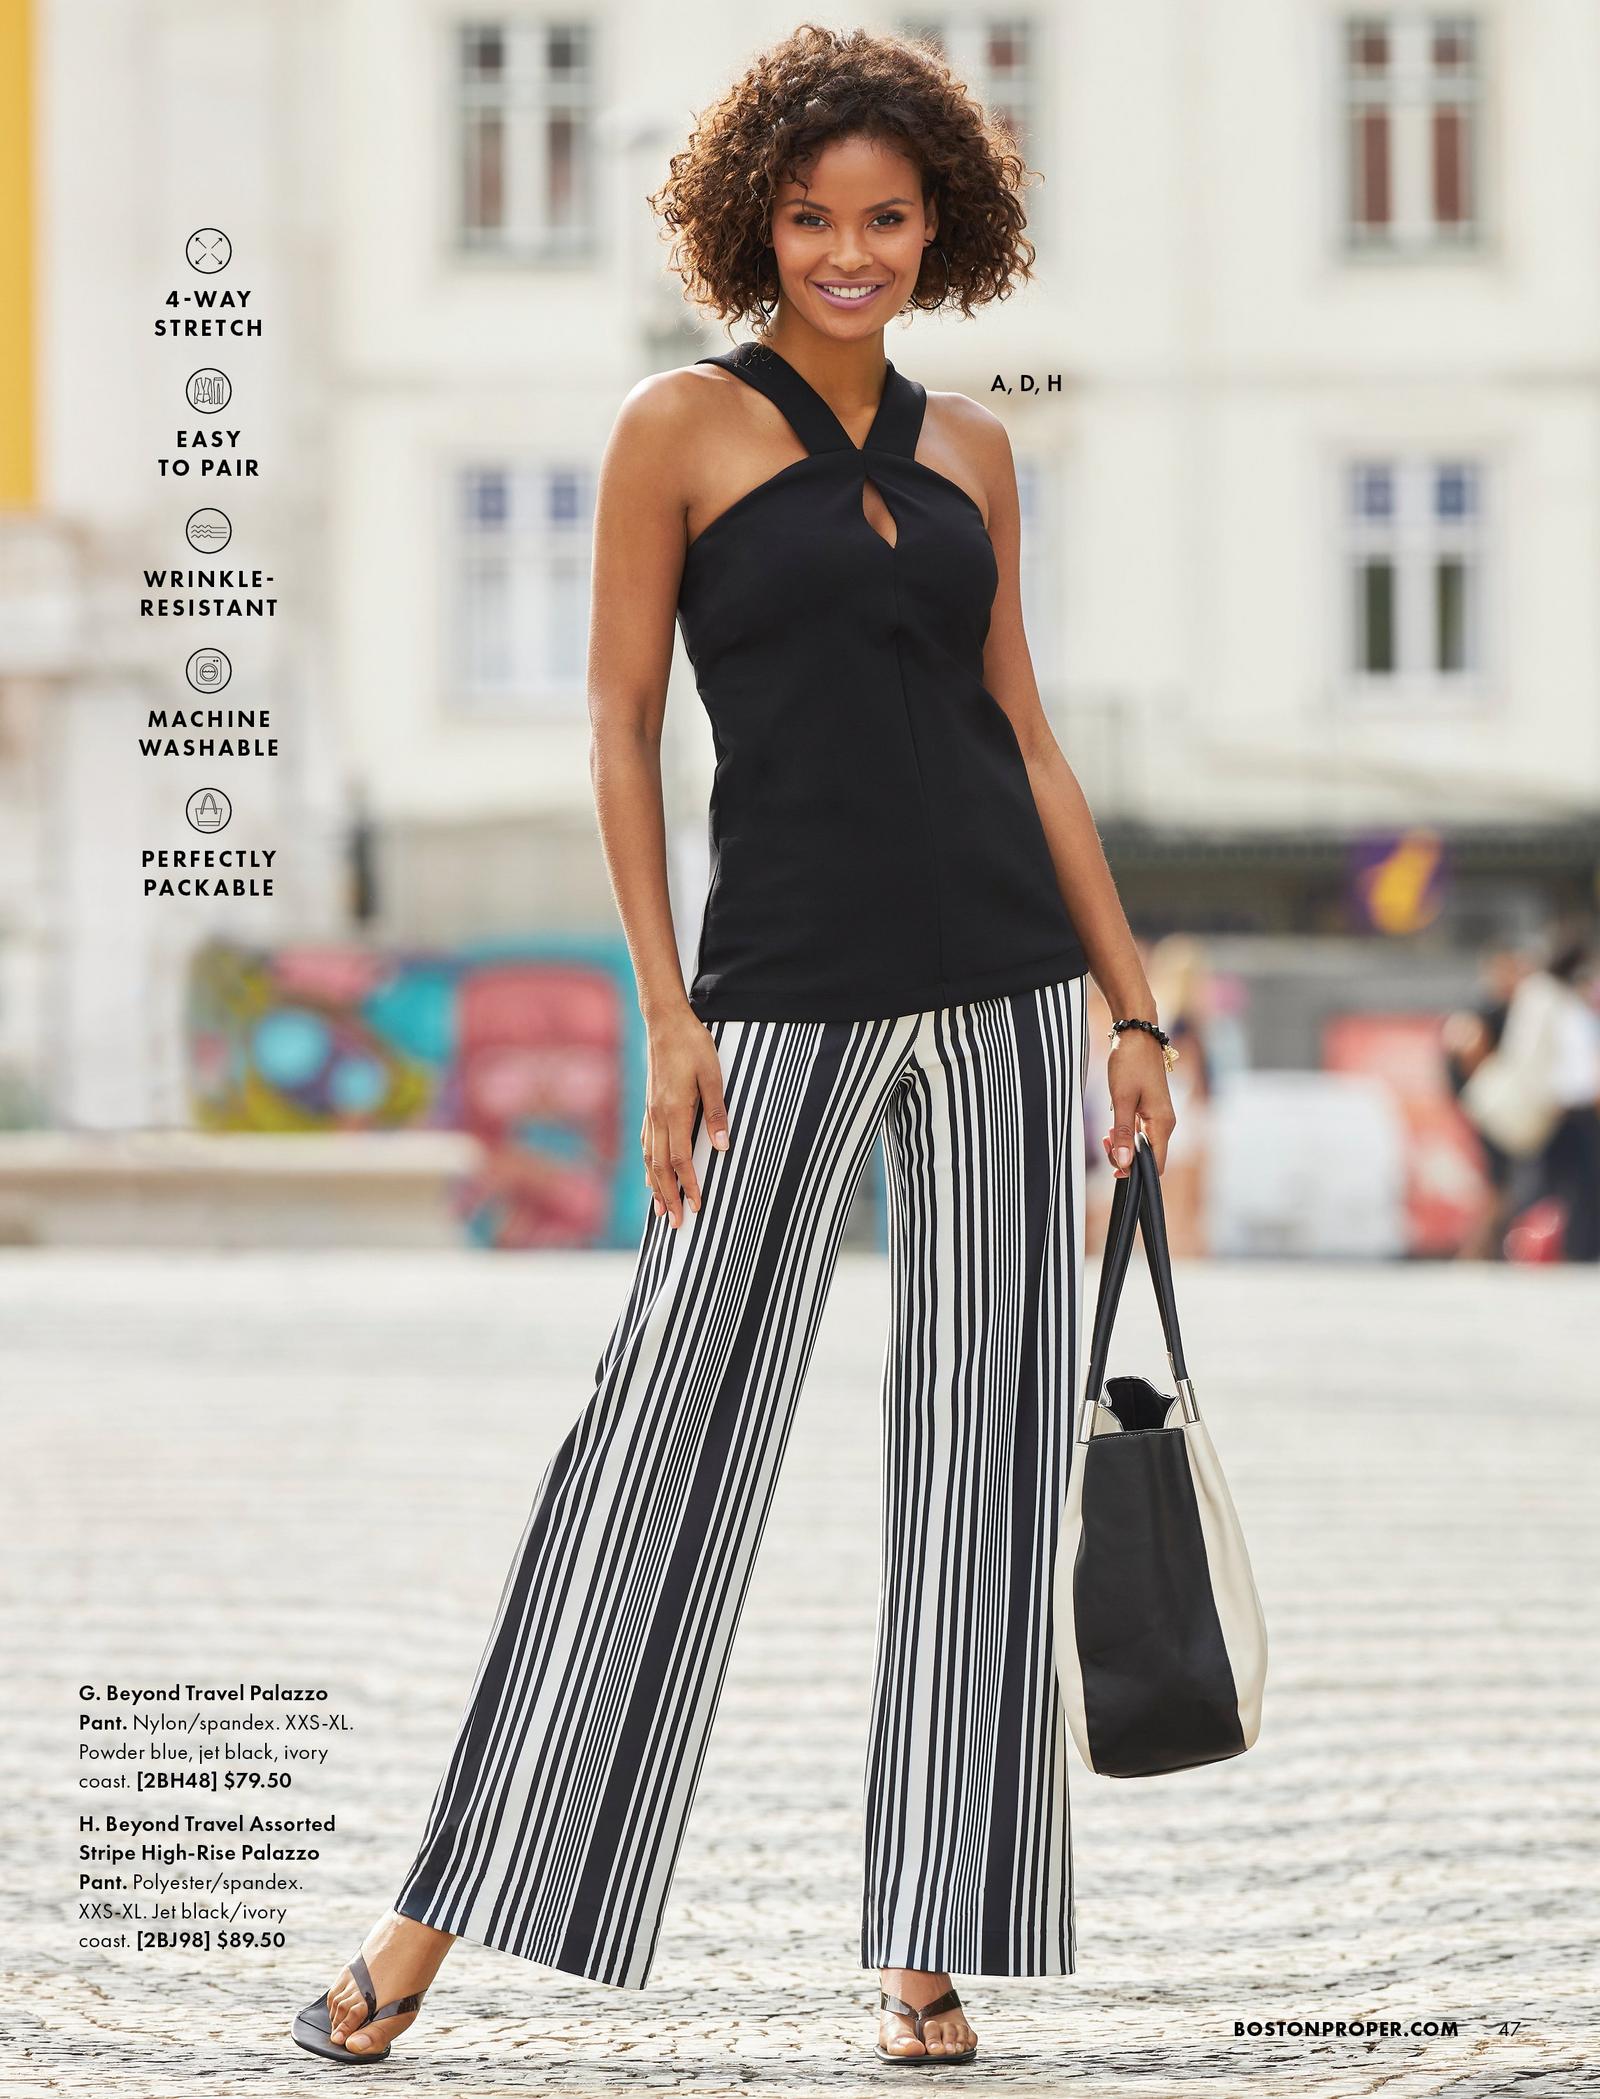 model wearing a black keyhole halter neck top, black and white striped palazzo pants, black thong heeled sandals, and holding a black and white bag.